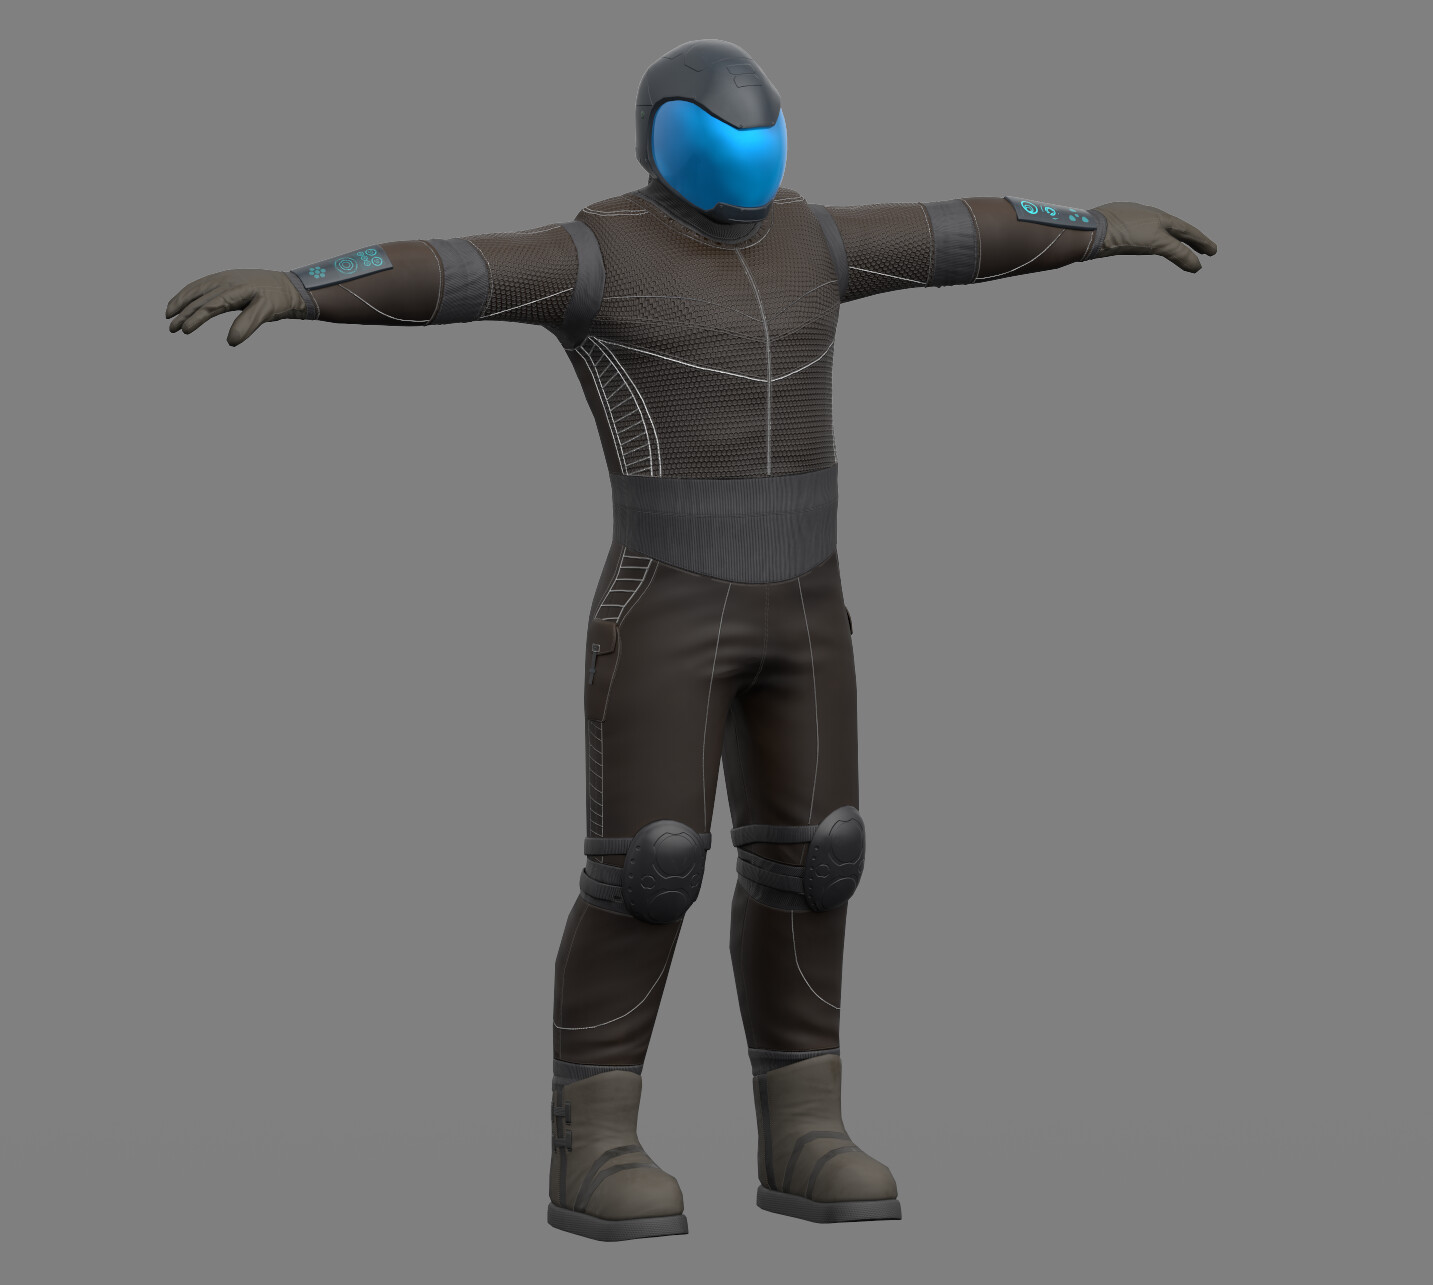 Space Delivery Character Model
32k tris, 4x4k texture maps